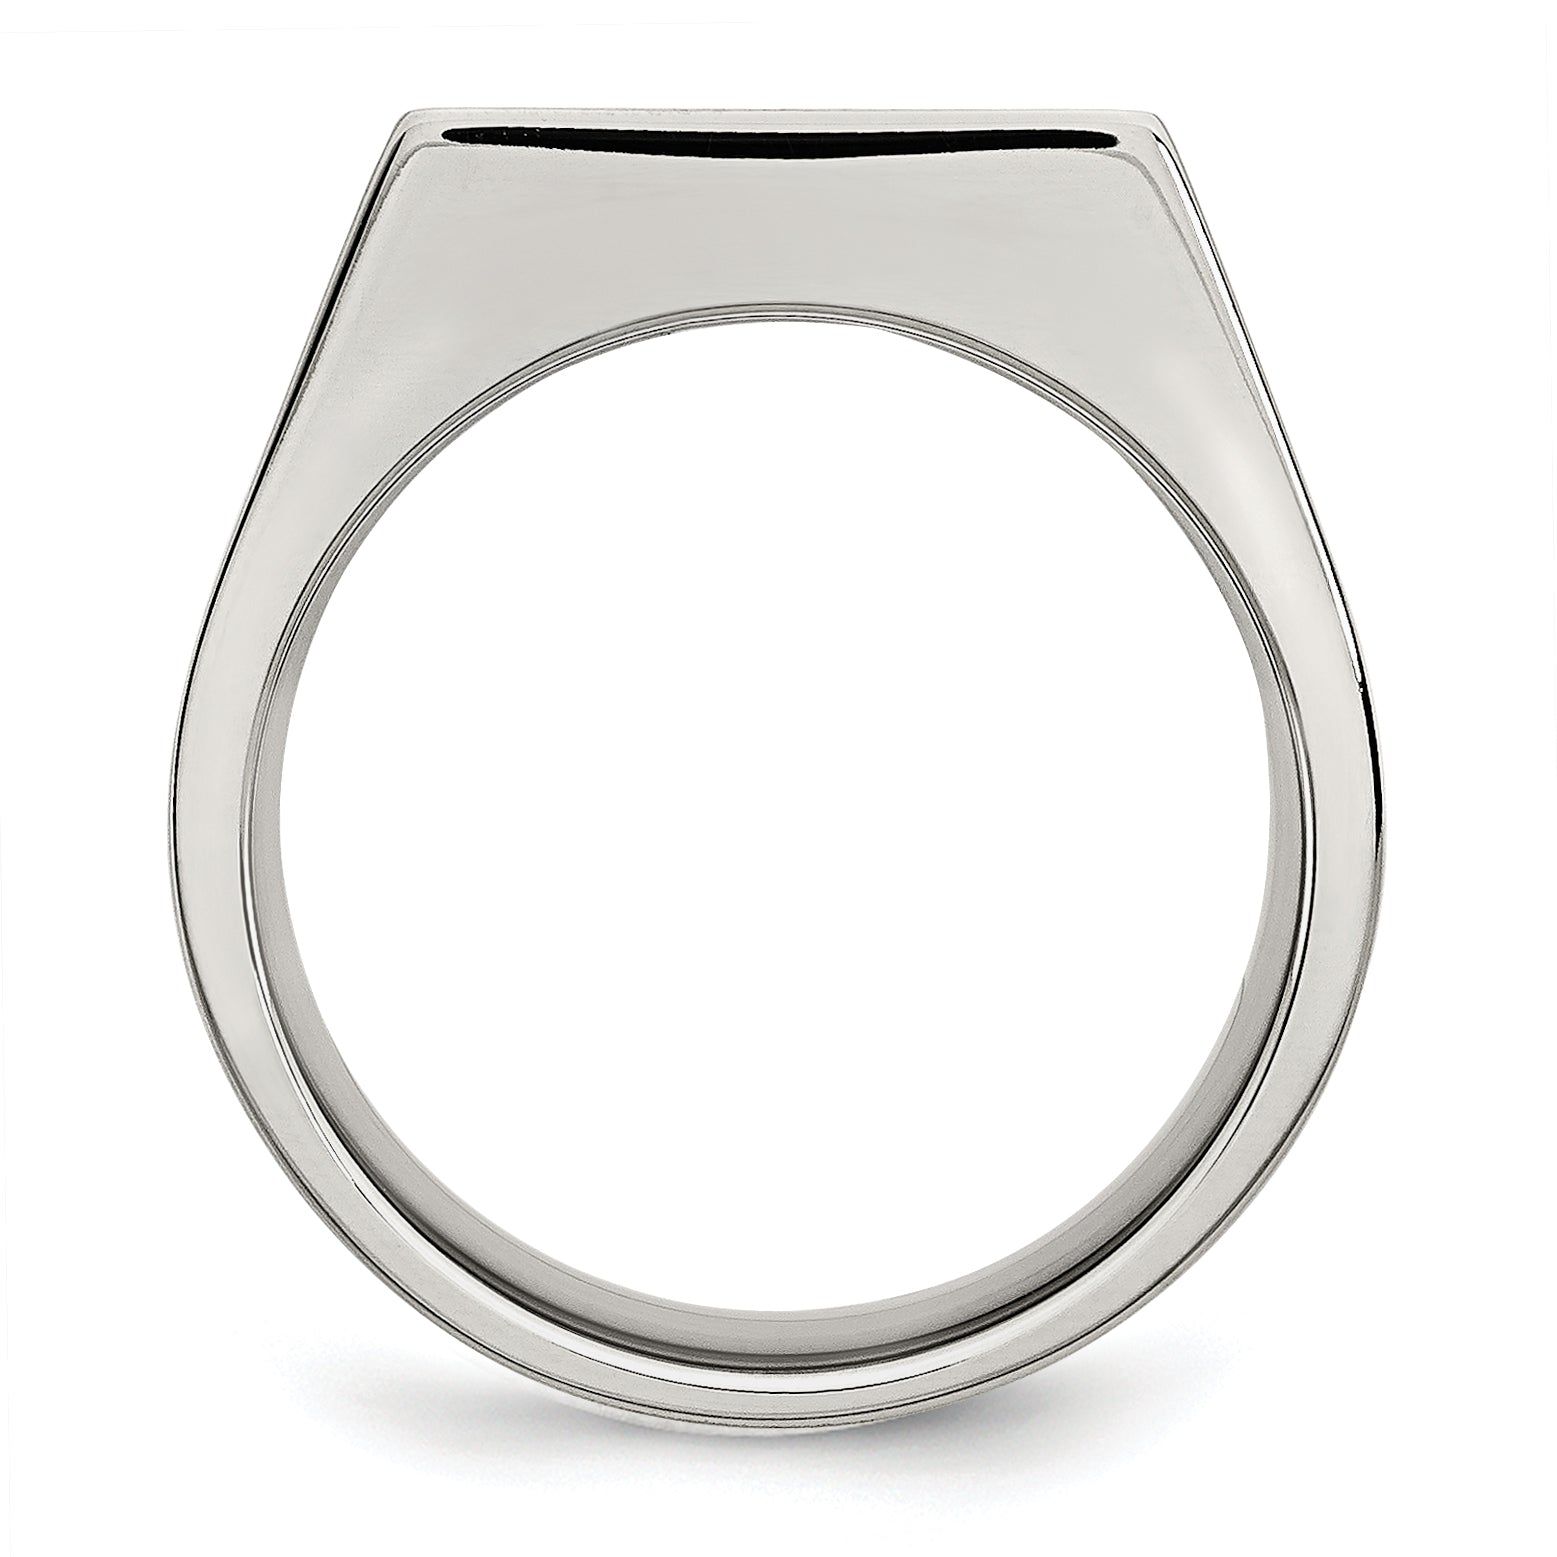 Stainless Steel Brushed and Polished Signet Ring